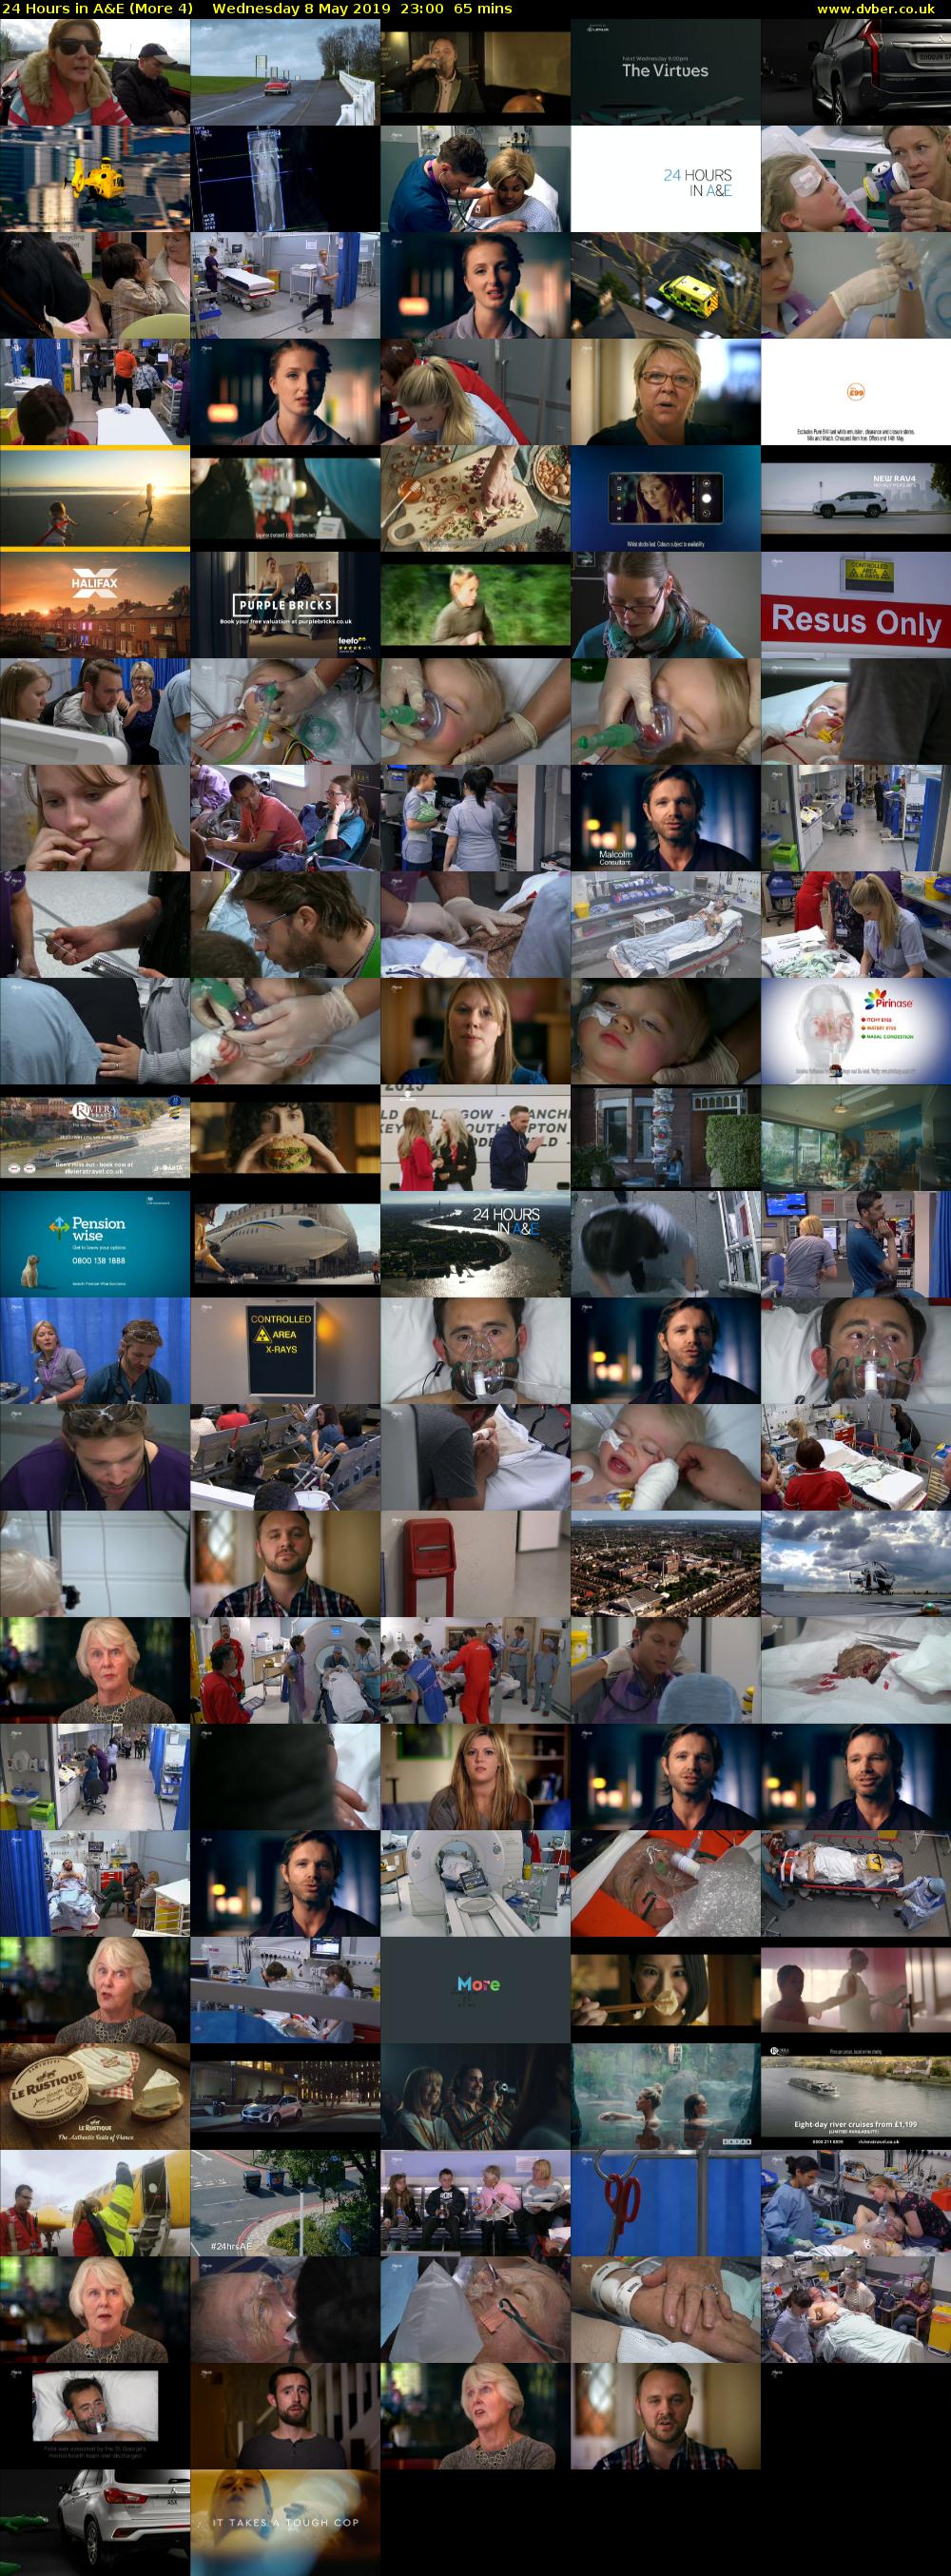 24 Hours in A&E (More 4) Wednesday 8 May 2019 23:00 - 00:05